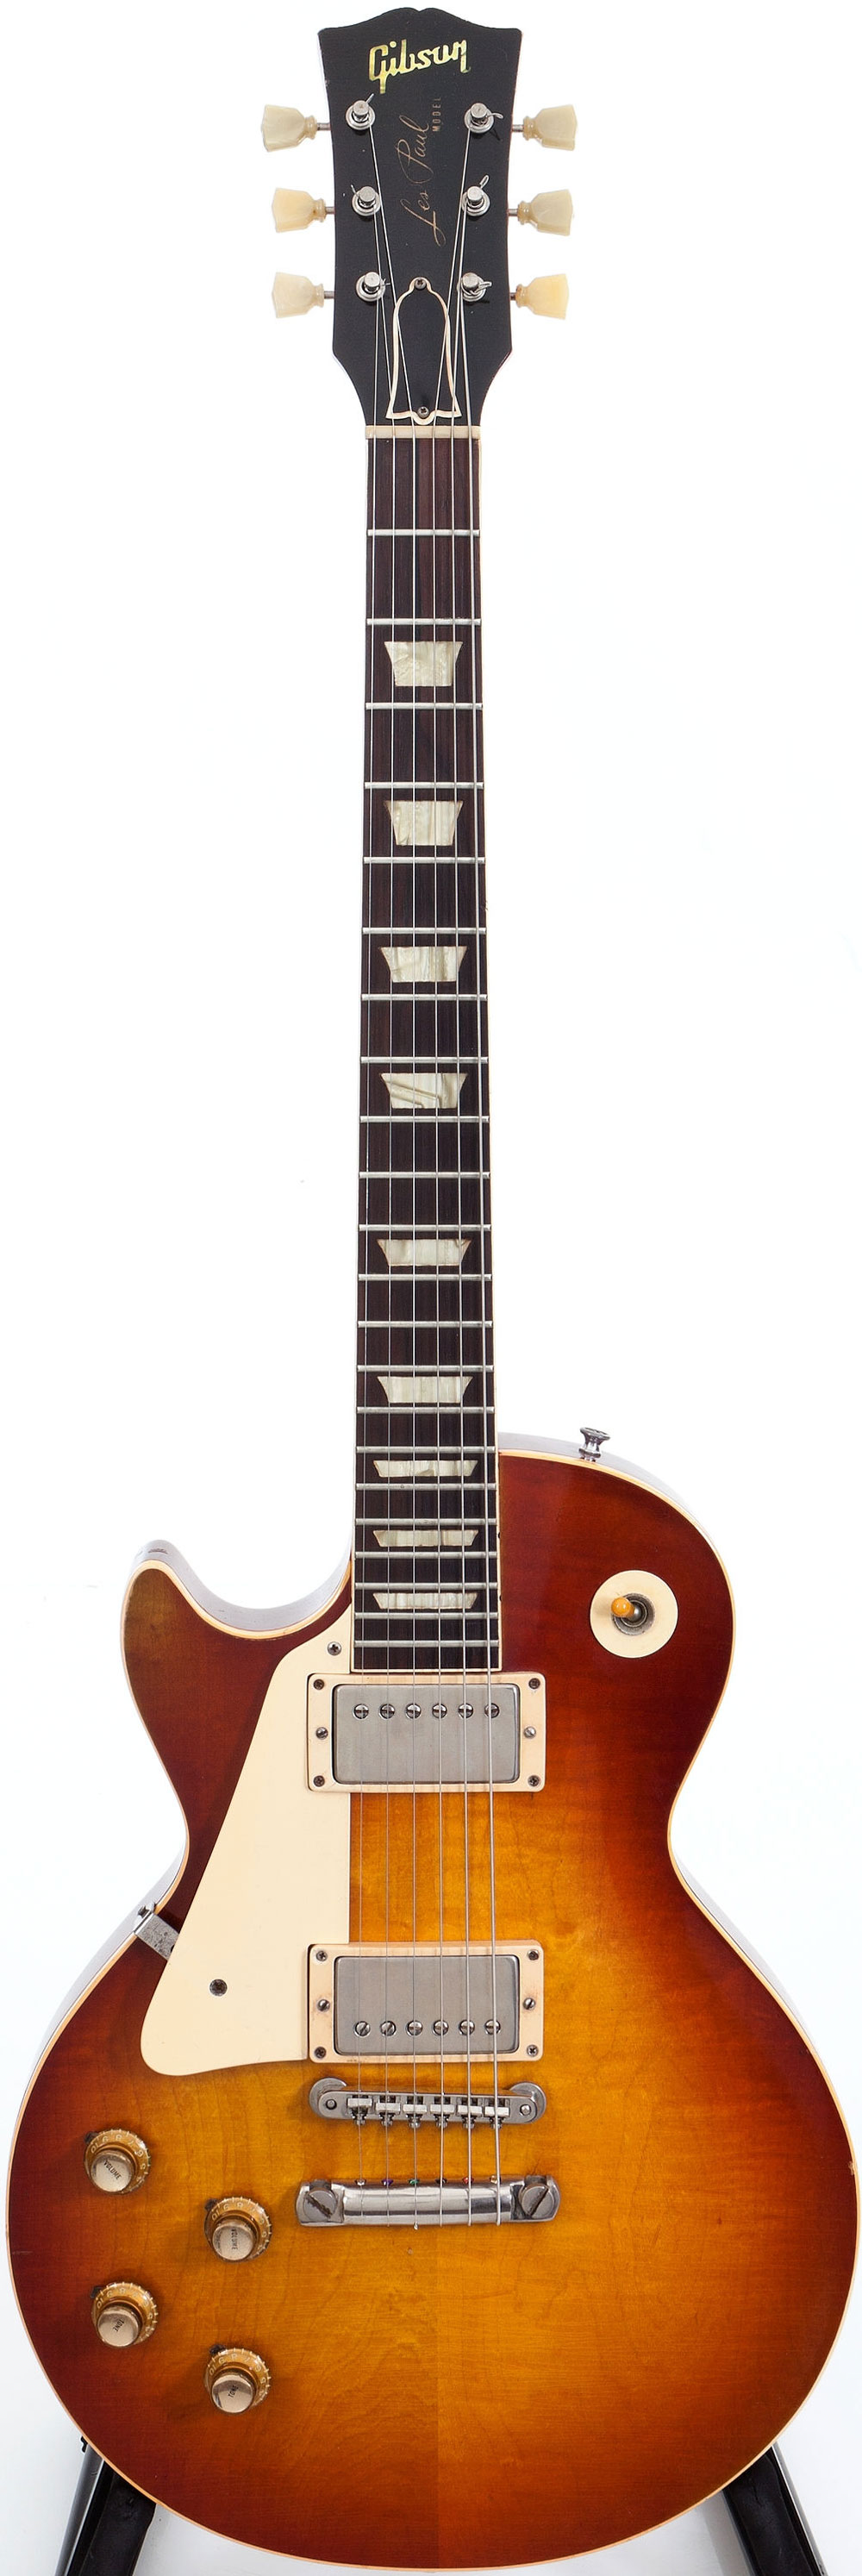 Extremely Rare 1959 Gibson Les Paul Standard Left Handed Guitar Could Fetch 125000 At Auction